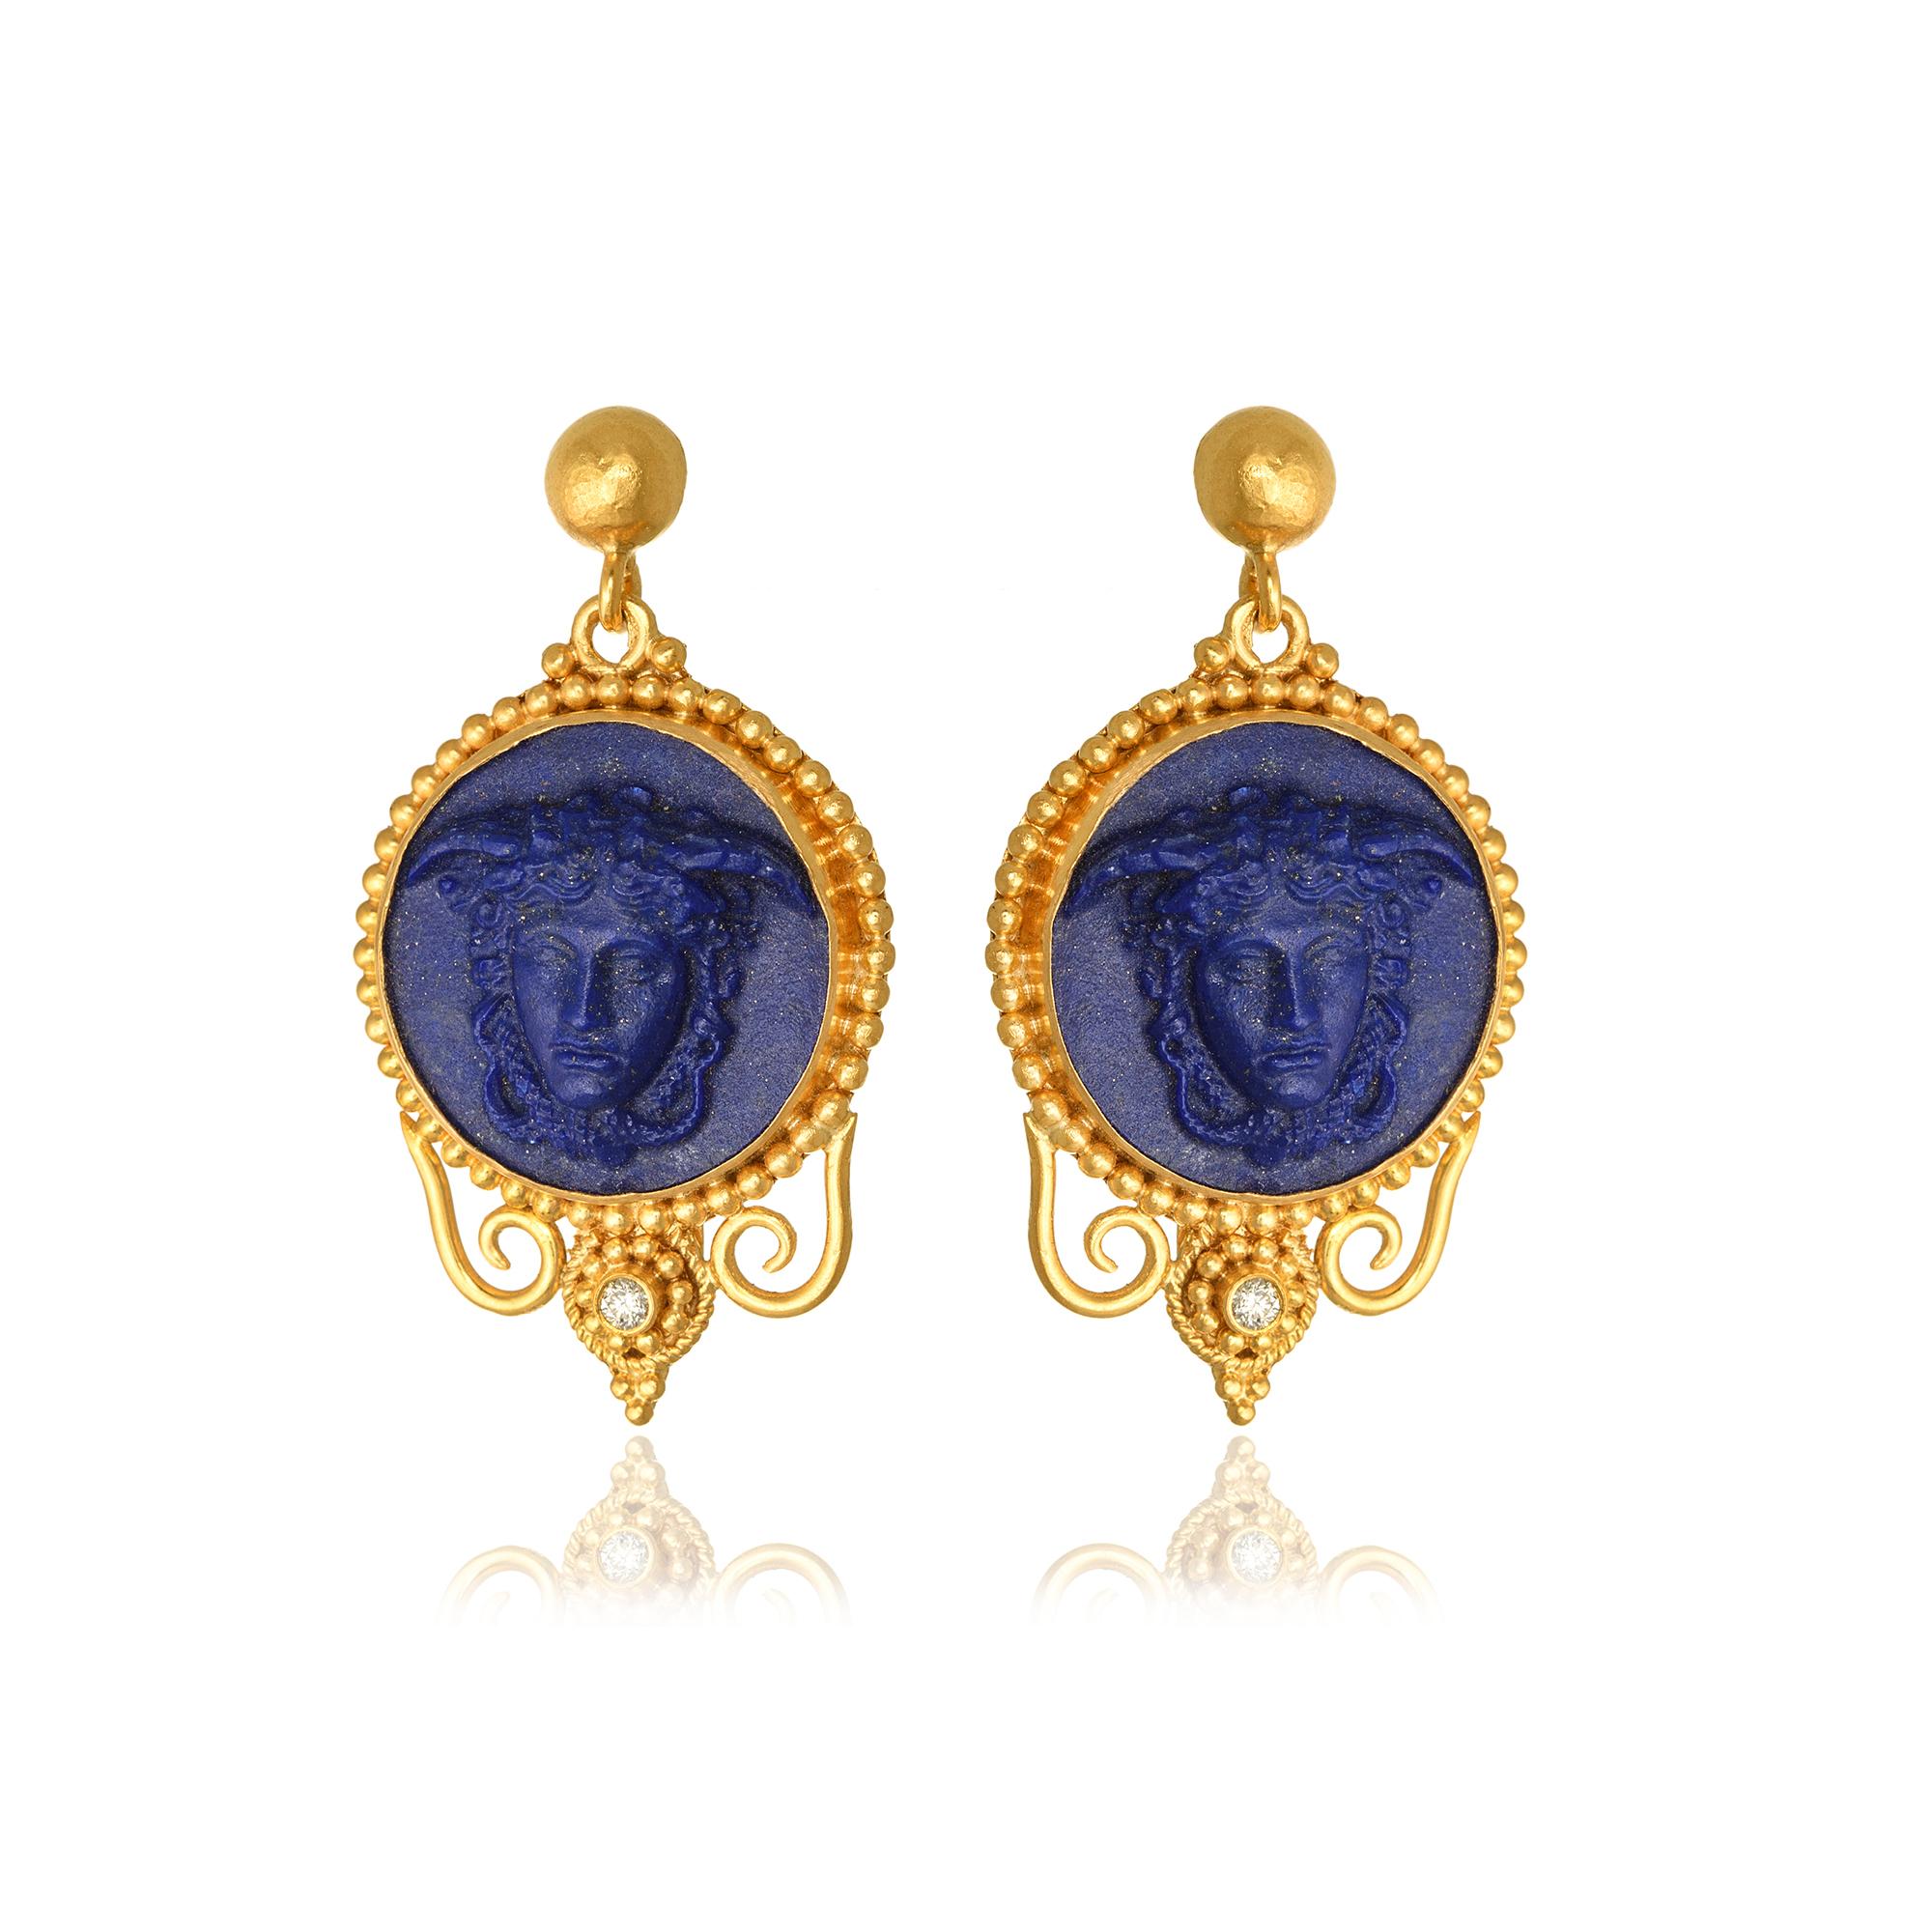 Medusa Head Drop Earrings handcrafted in 22Kt yellow gold, featuring a carved Lapis Lazuli center and a brilliant cut diamond. Inspired by the ancient greek mythology and Perseus's accomplishments, Nicofilimon created this jewelry masterpiece